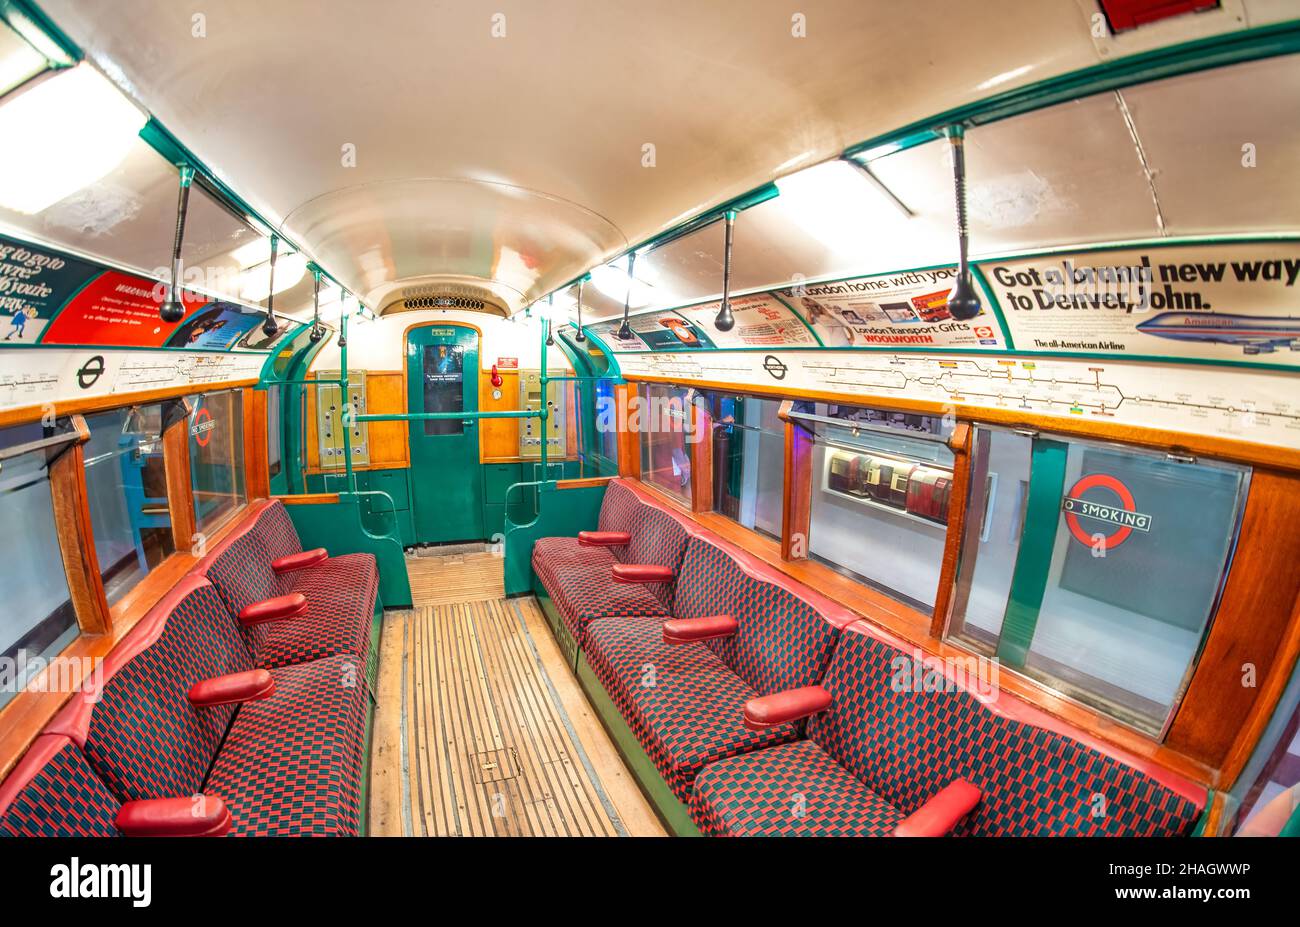 LONDON, UNITED KINGDOM - Oct 12, 2021: The inside of an old subway train in the London Transport Museum Stock Photo